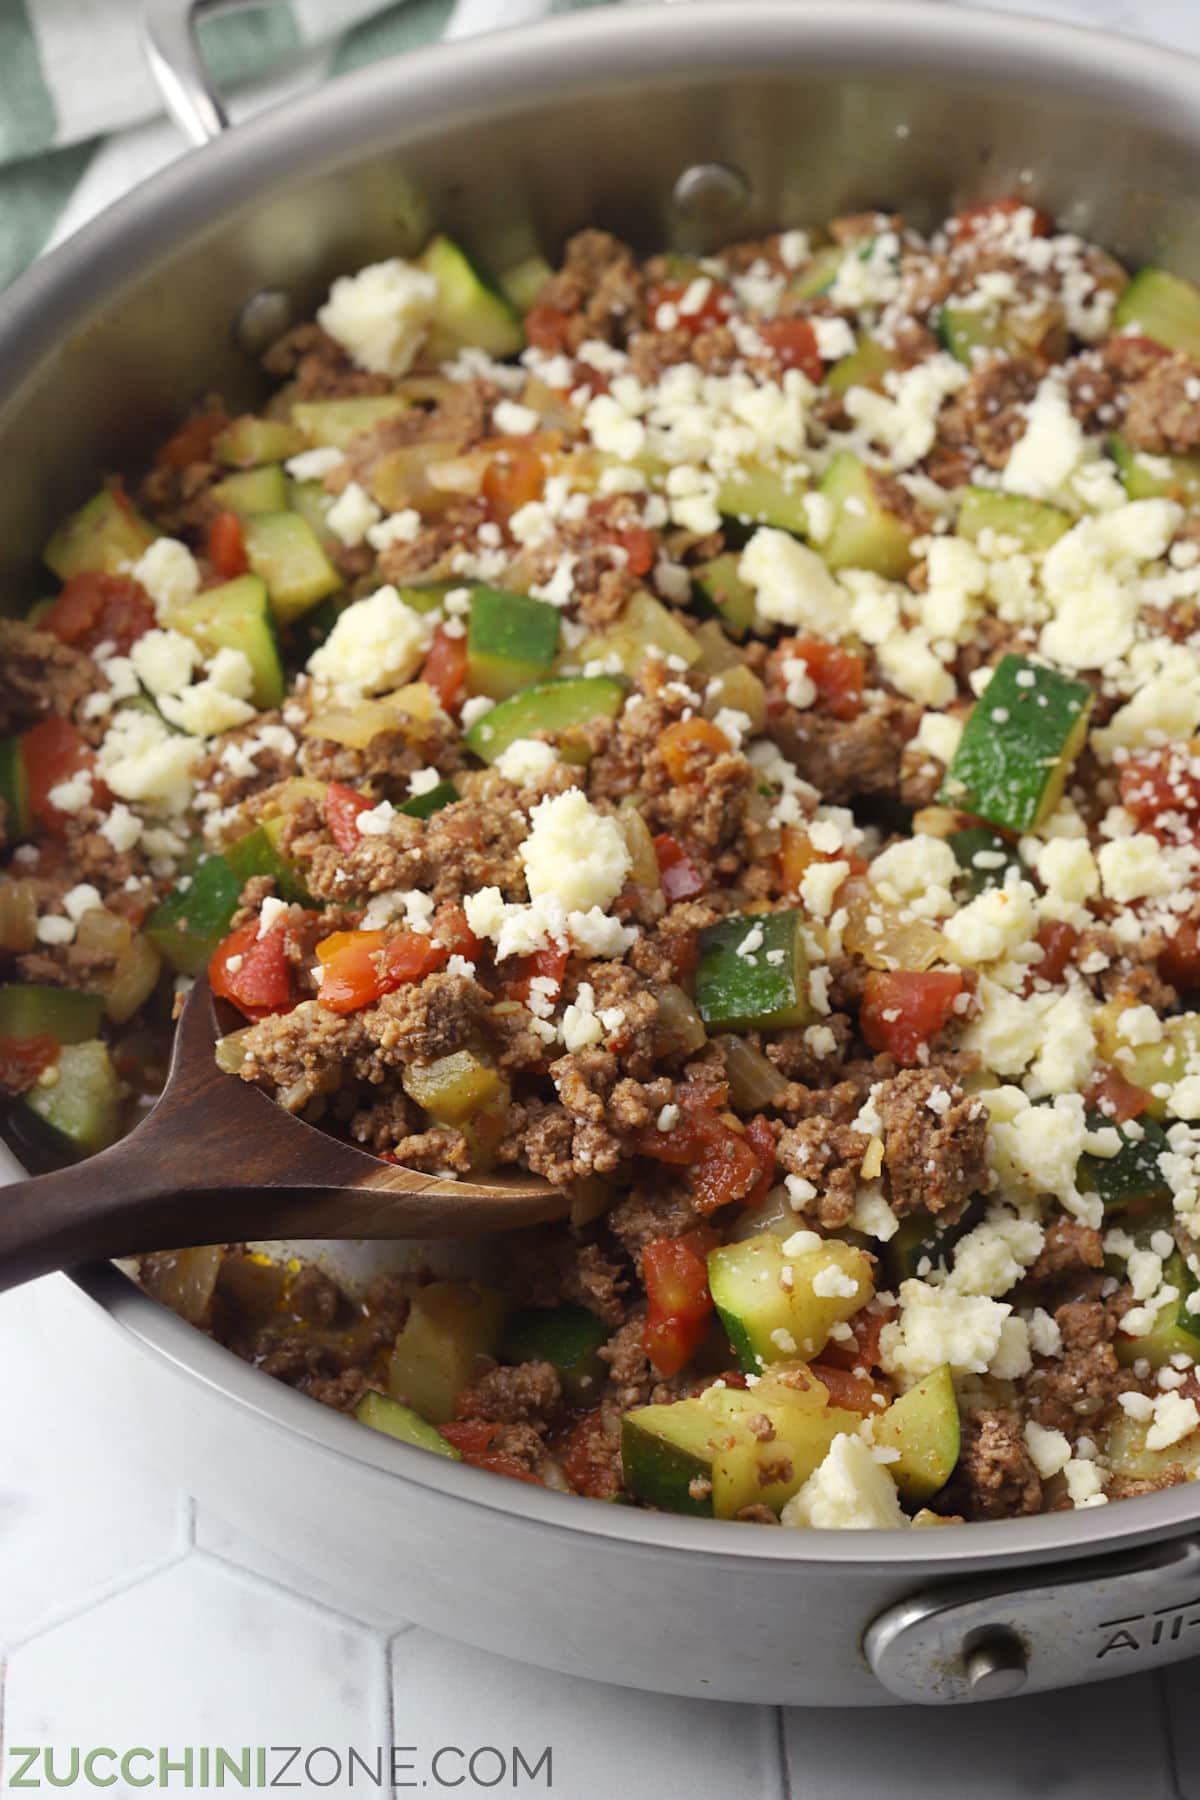 Mexican zucchini skillet with ground beef, vegetables, and cheese.